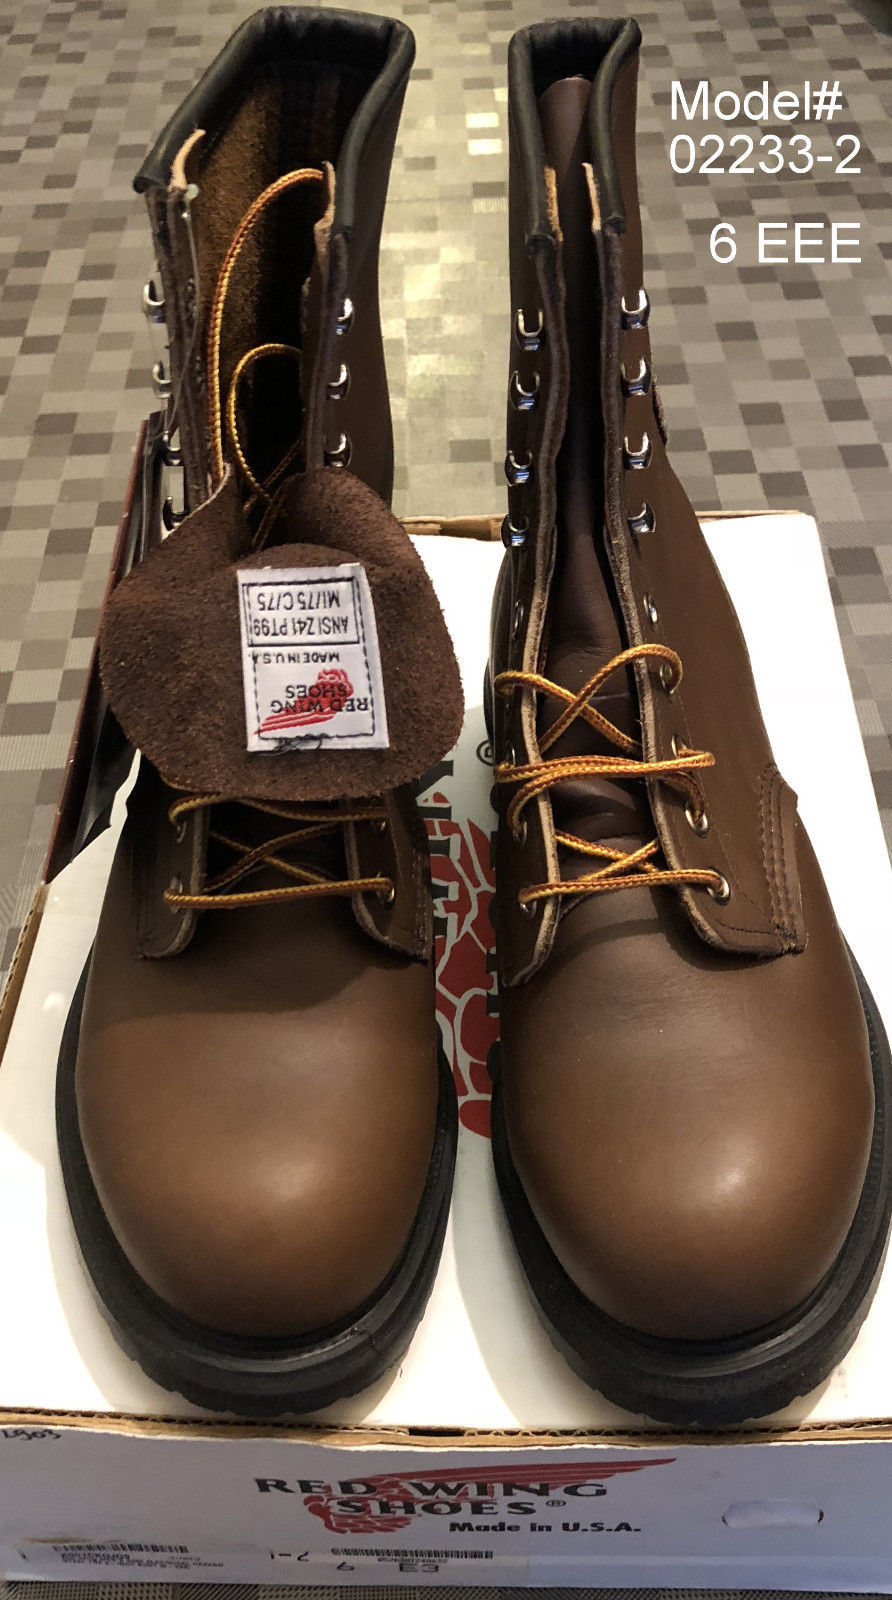 red wing boots electrical hazard